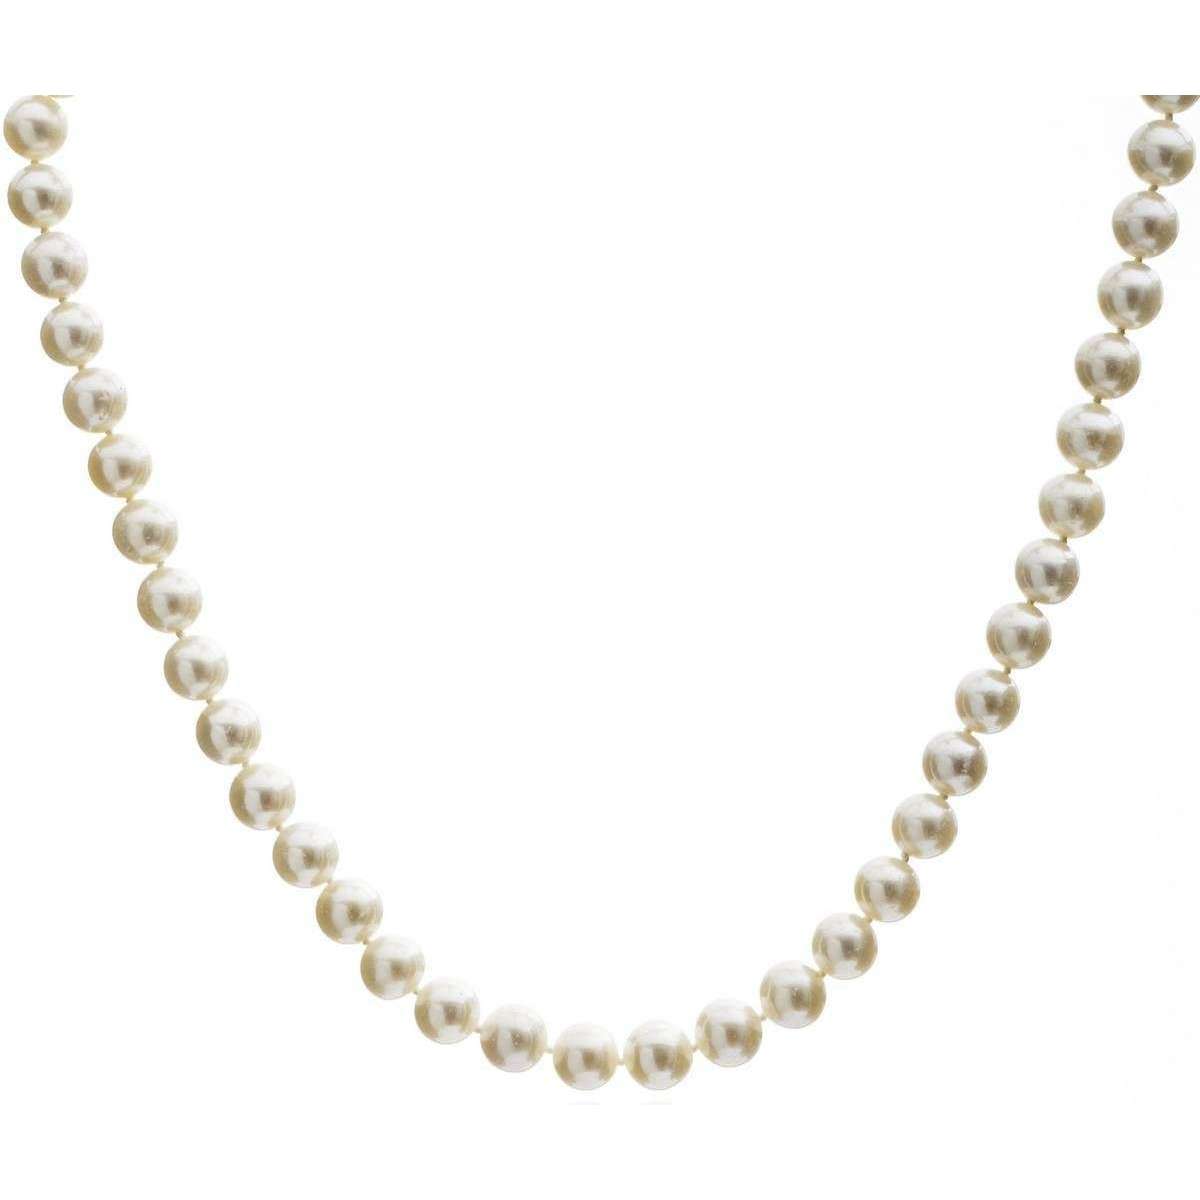 Pearls of the Orient Gratia Freshwater Pearl Necklace - White